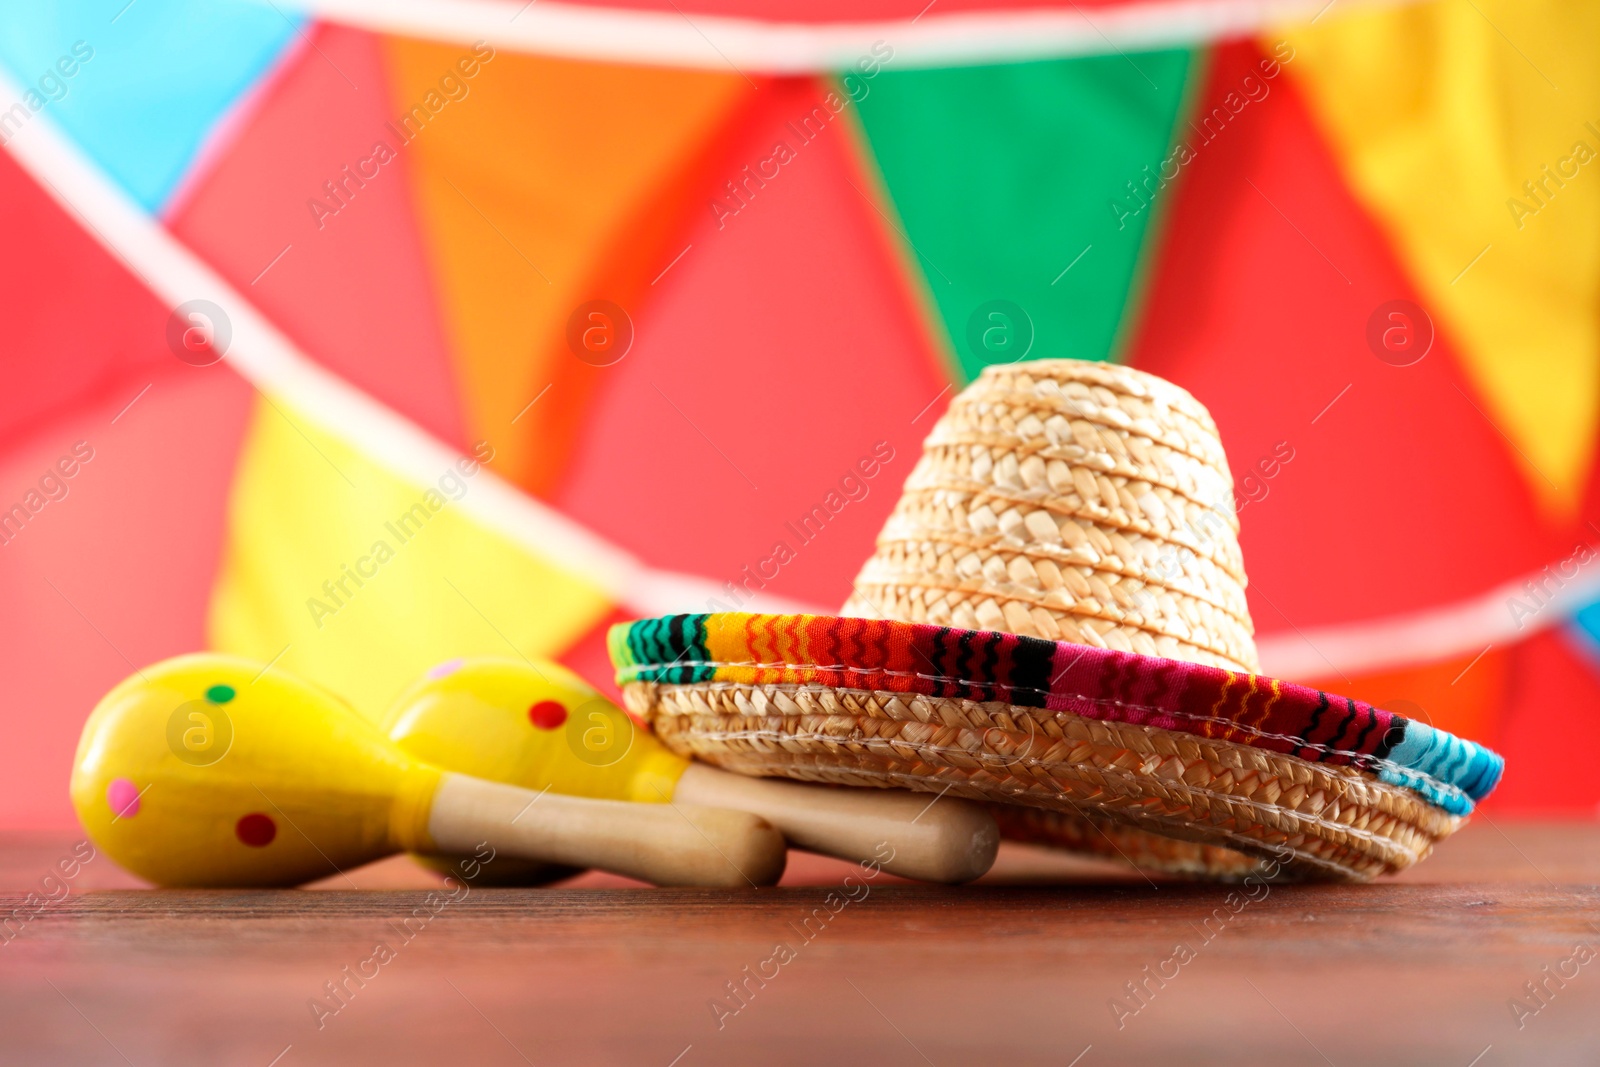 Photo of Mexican sombrero hat and maracas on wooden table